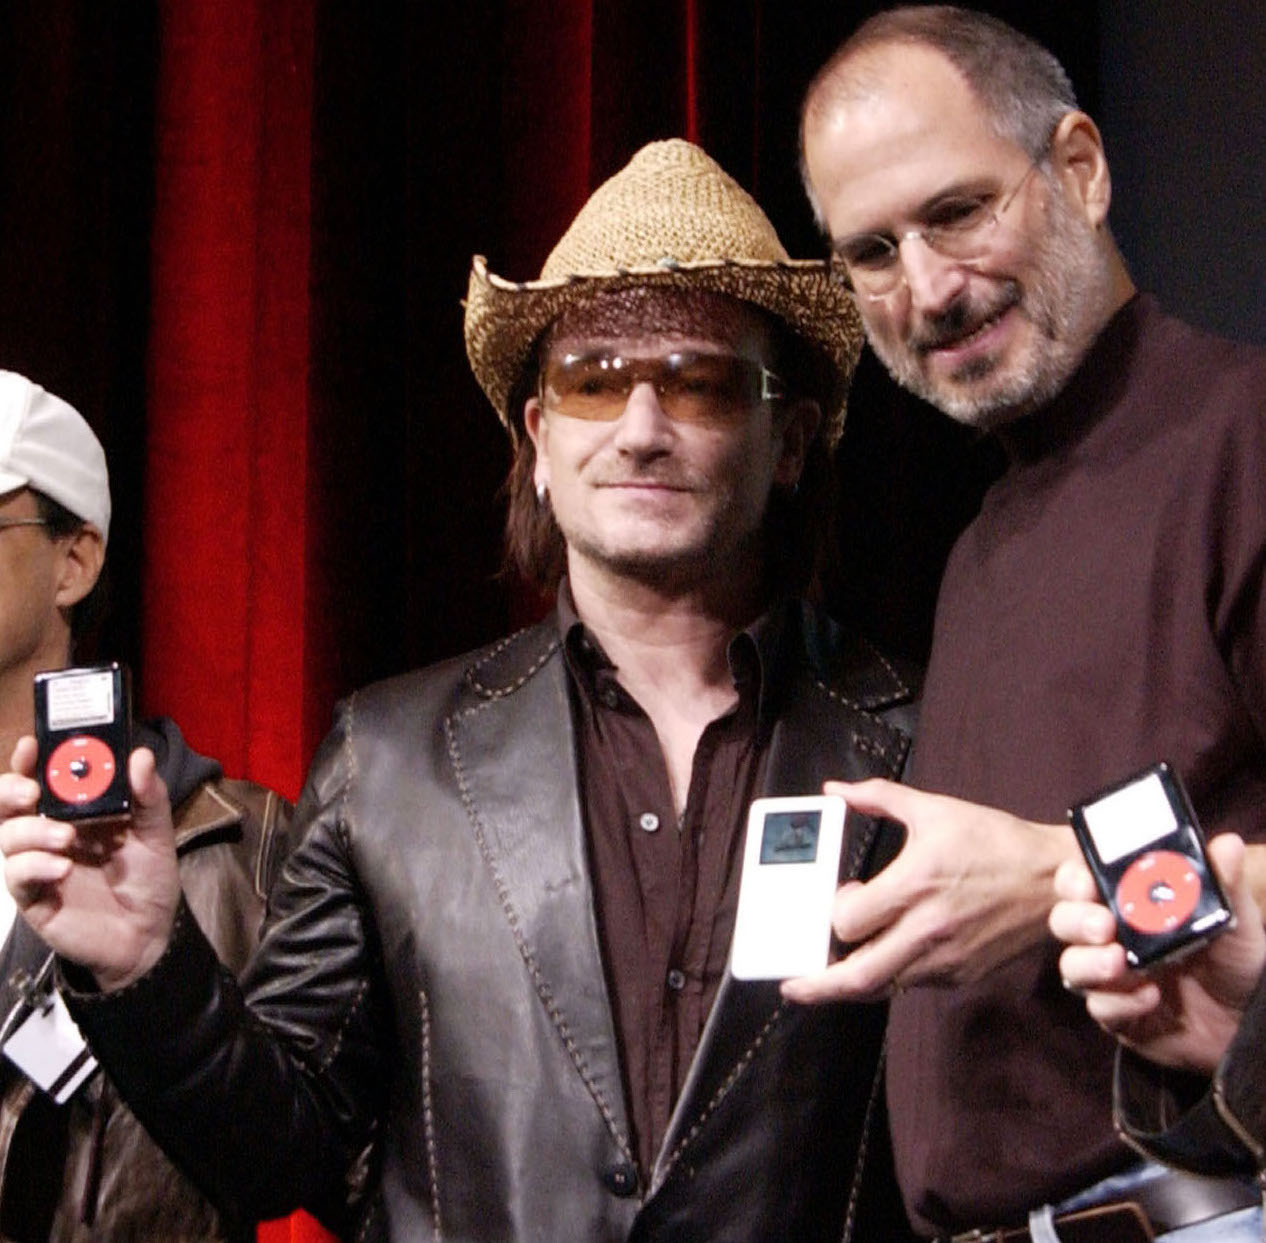 Apple Forgets To Celebrate The iPod’s 15th Birthday